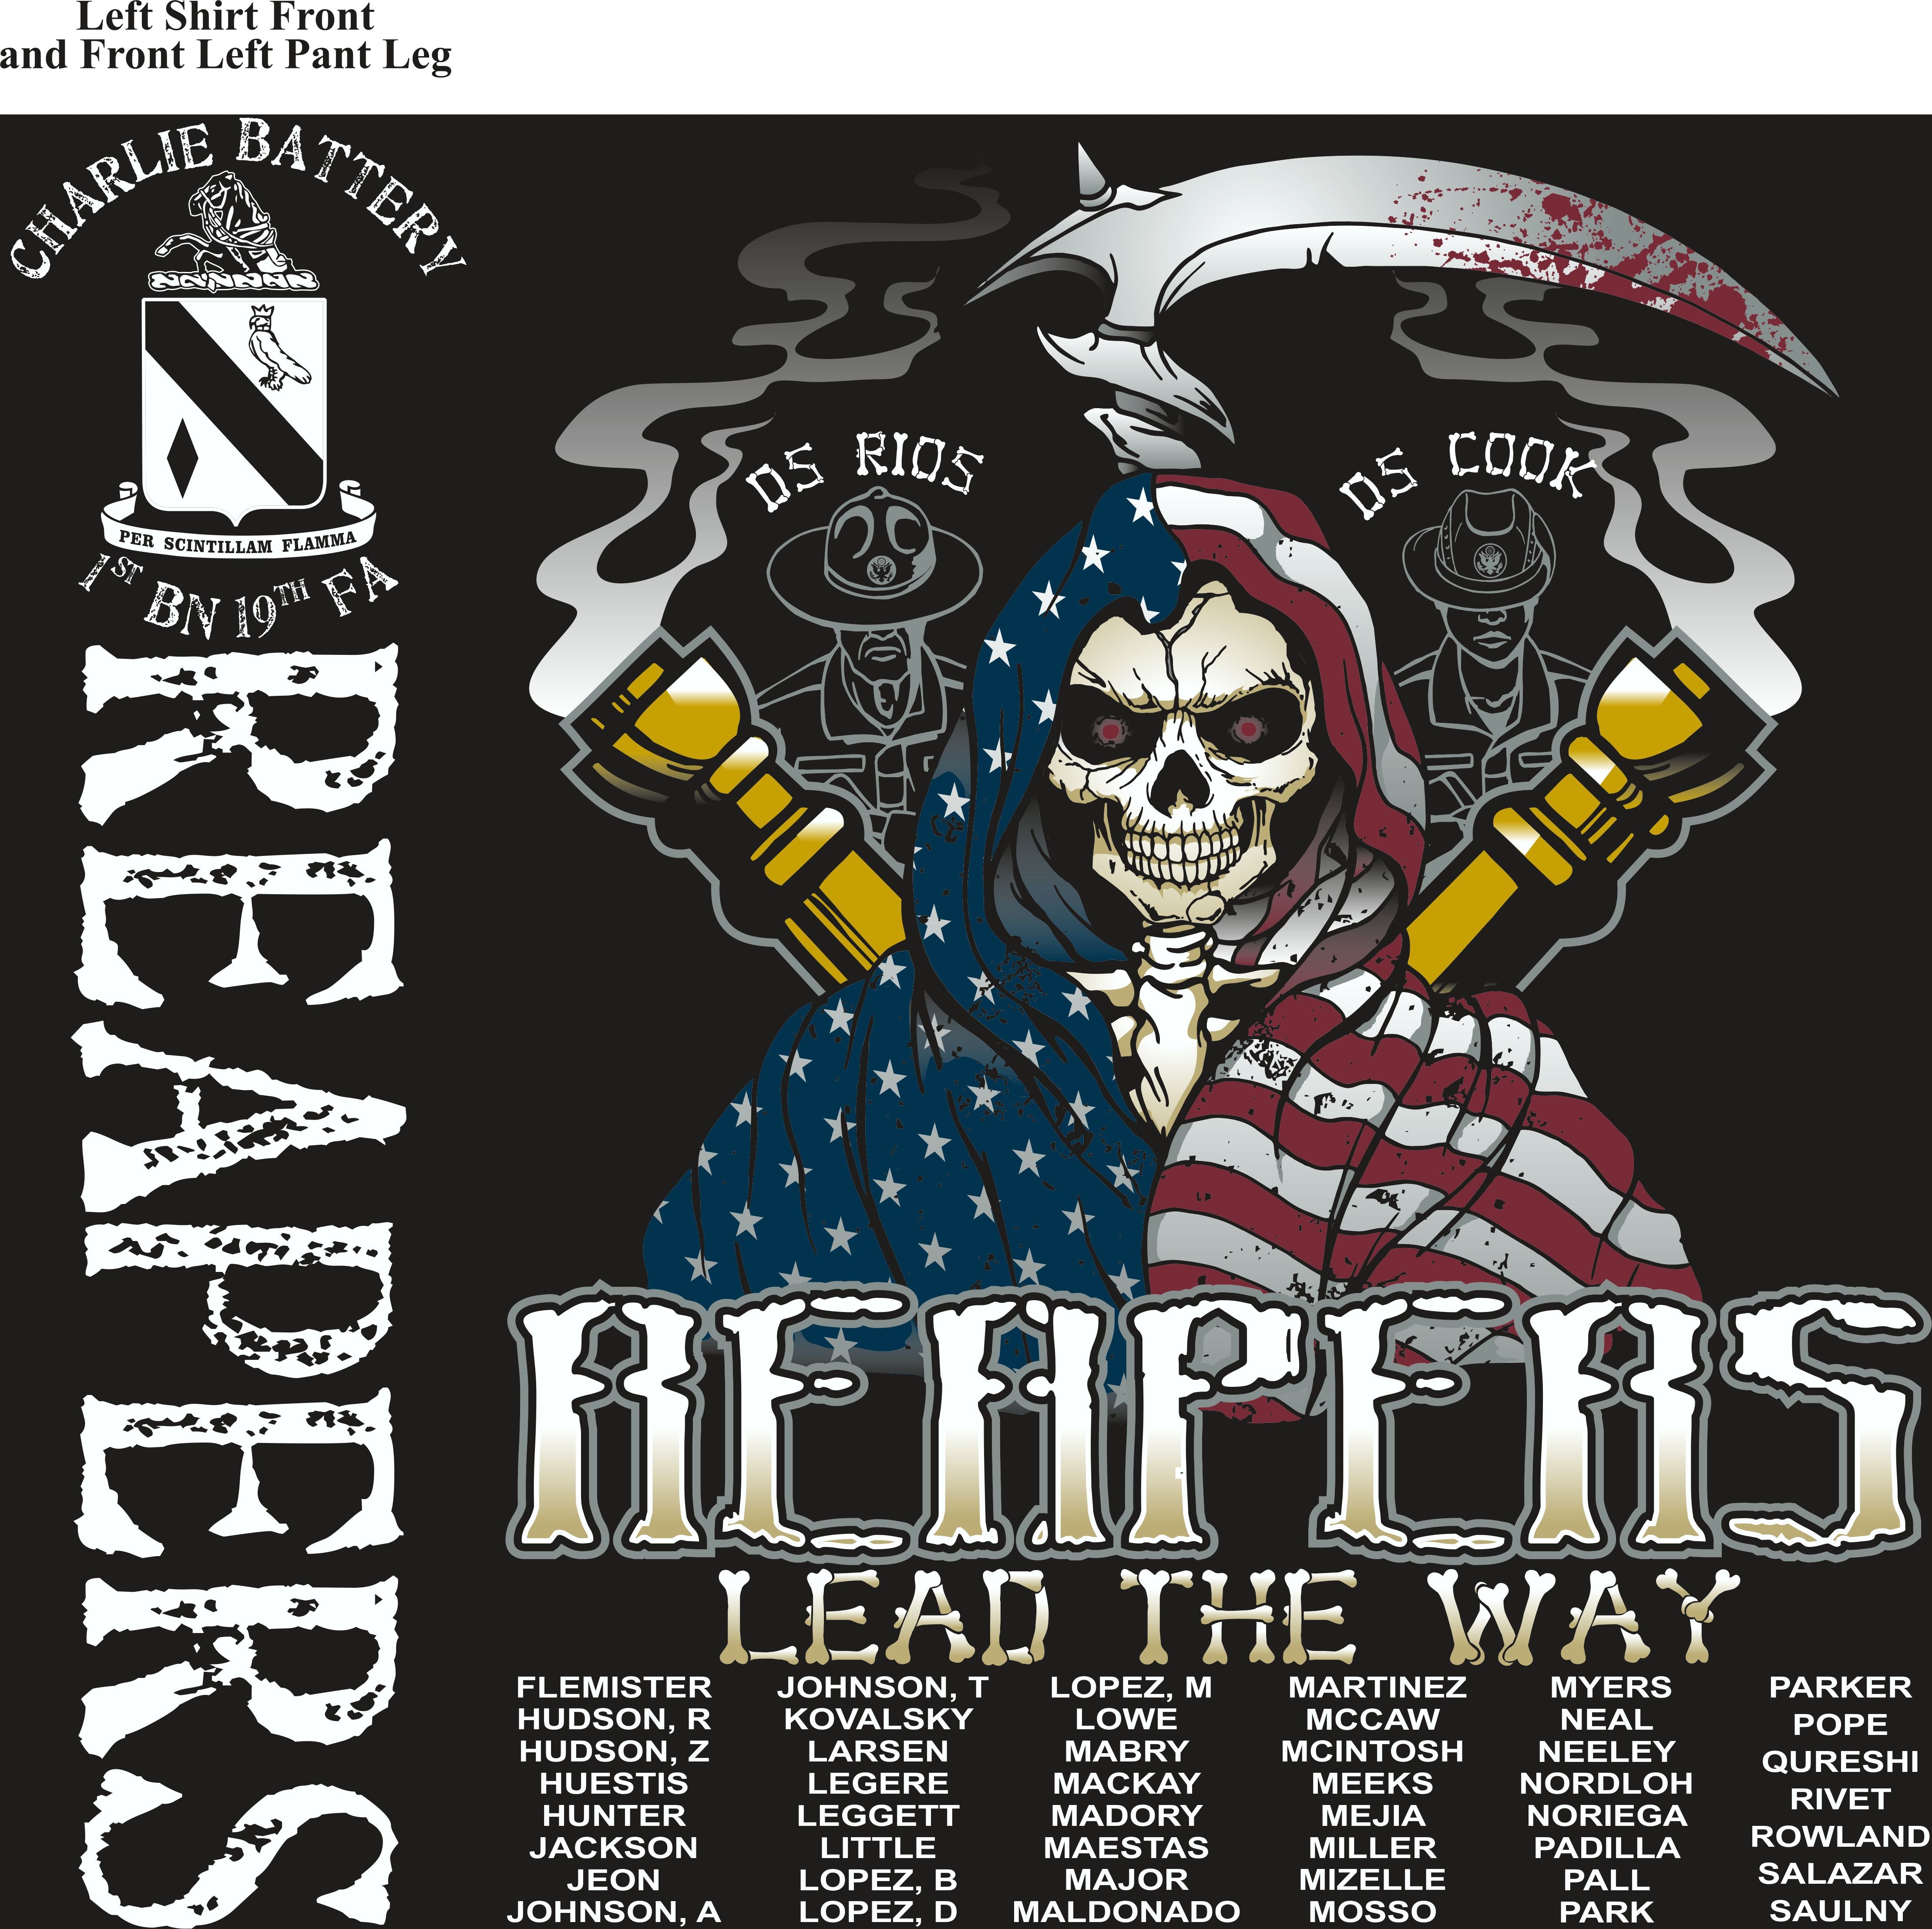 Platoon Shirts (2nd generation print) CHARLIE 1ST 19TH REAPERS APR 2018